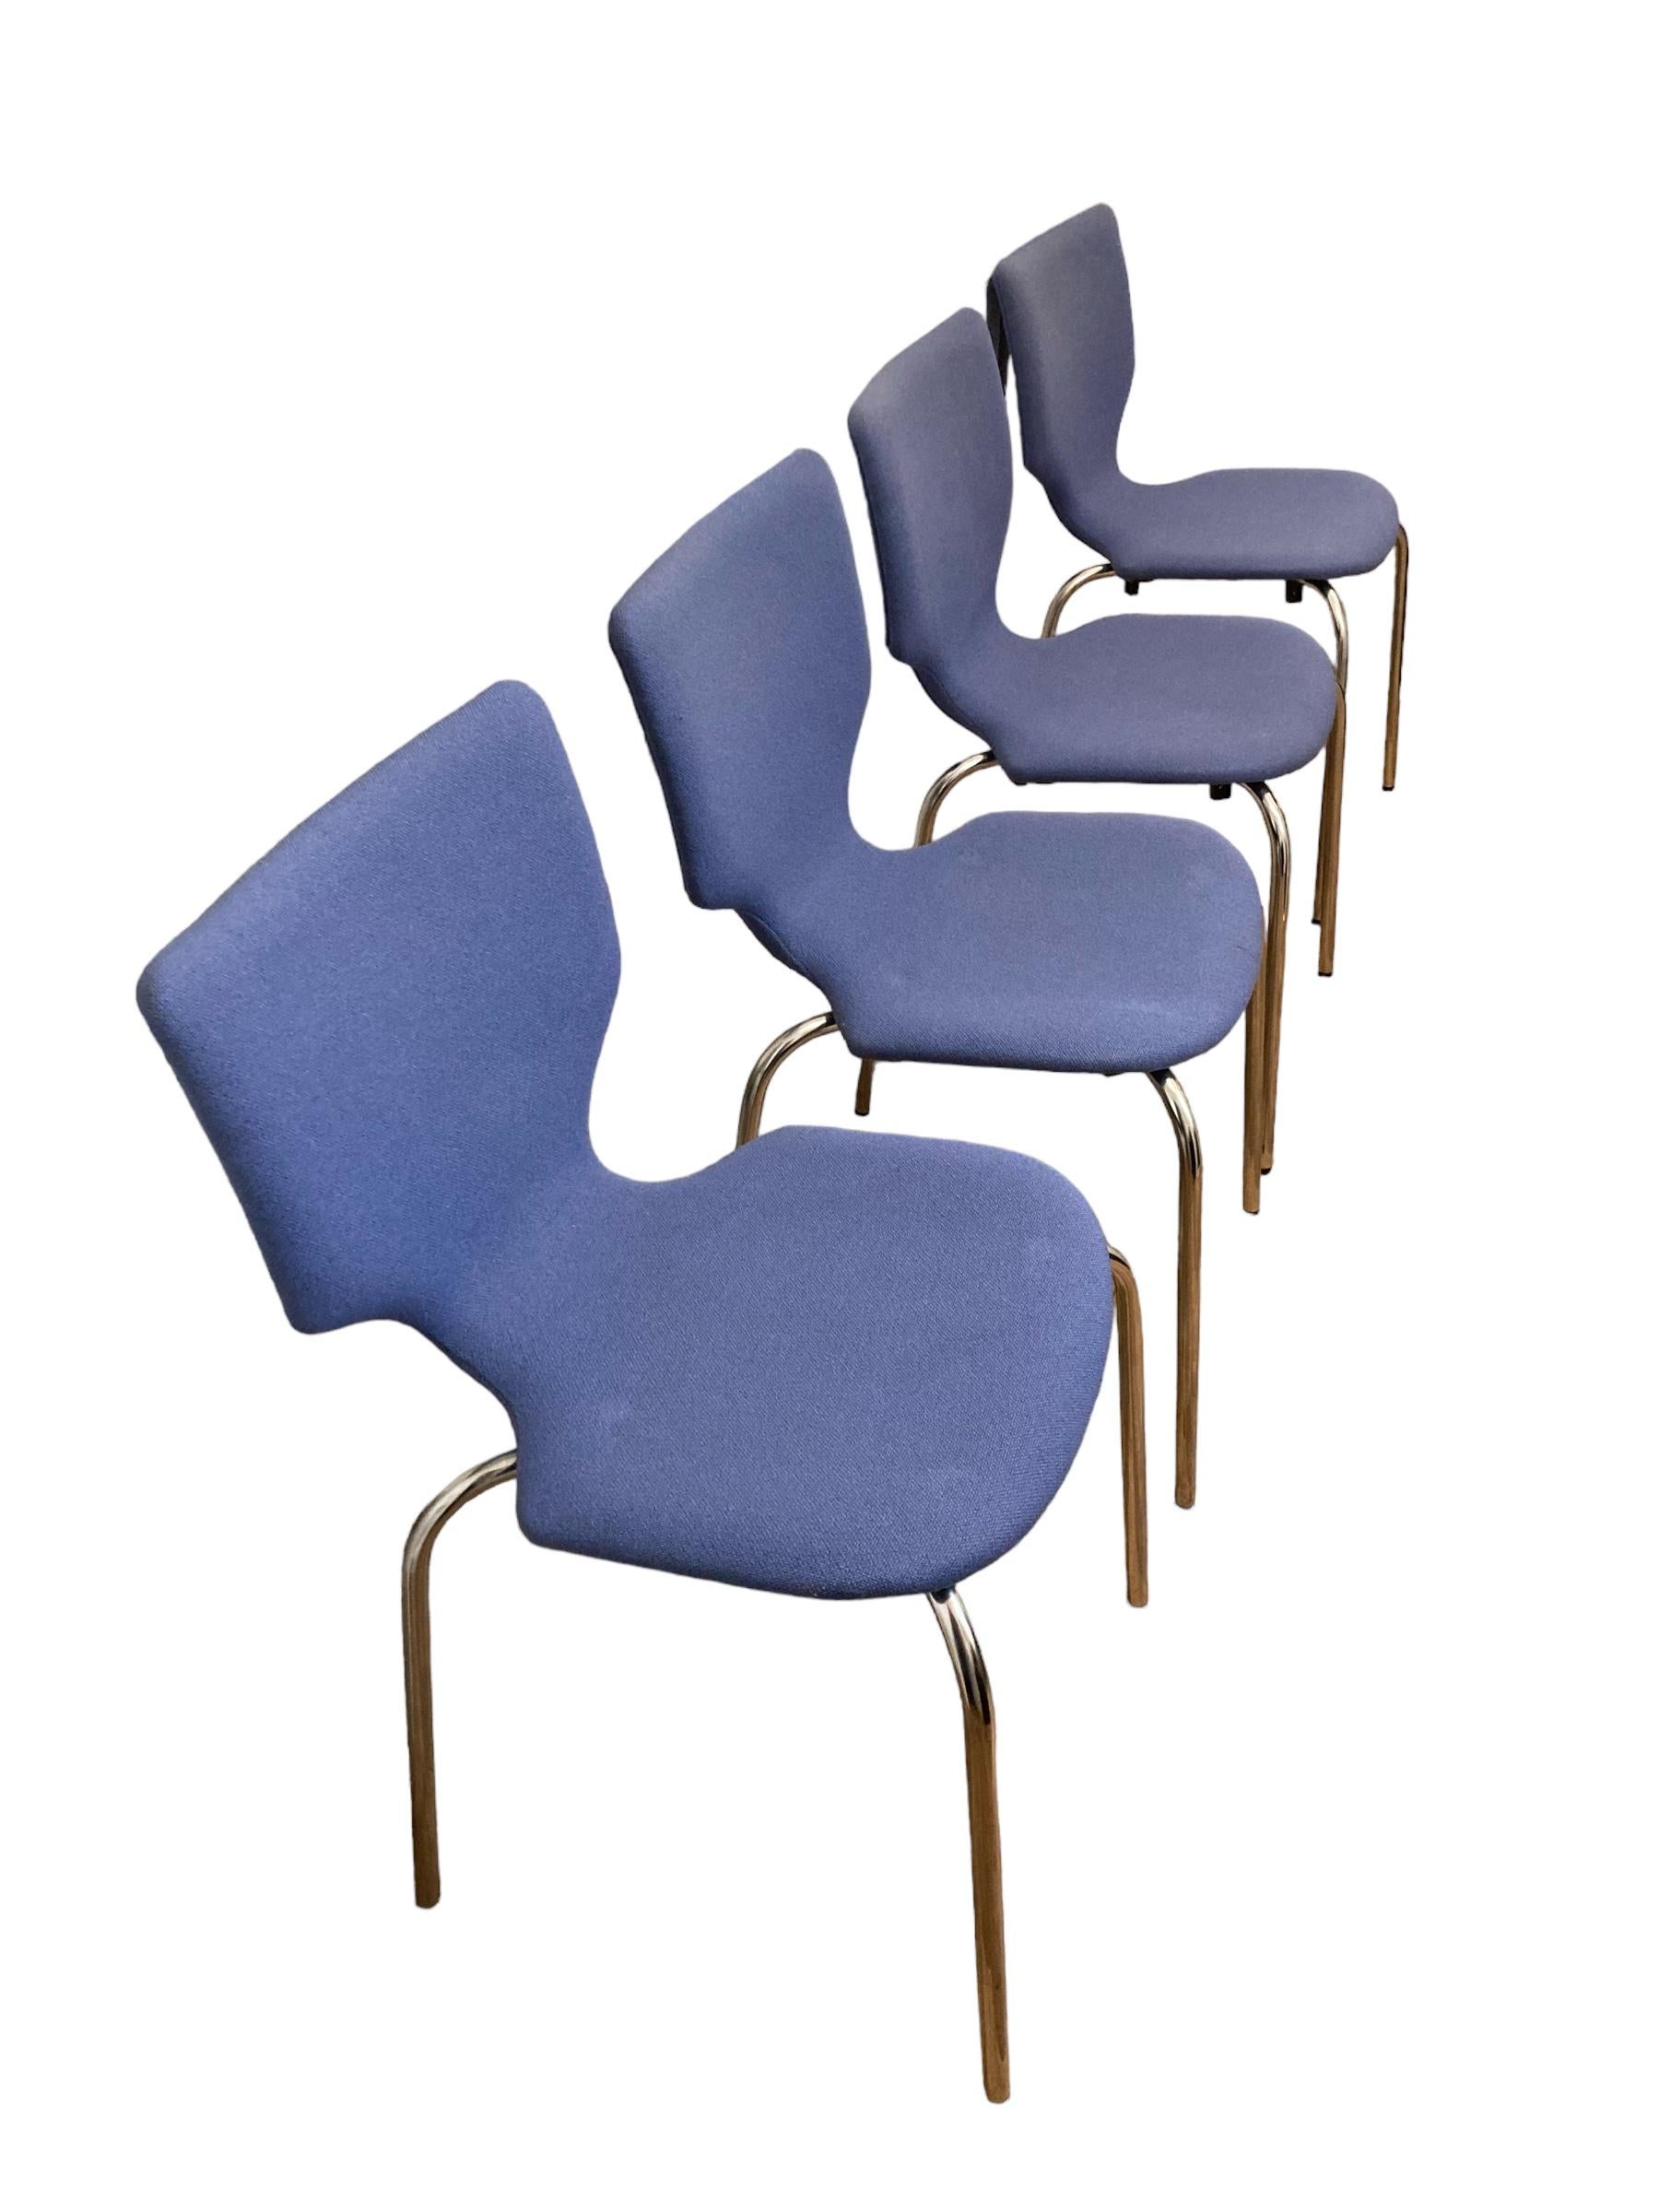 Set of four Danish Duba Mobelindustri Conference or Dining Chairs, beautiful light blue fabric with Chrom legs. An unusual shaped back making these chairs stylish, comfortable with a classic Danish Mid Century look.

H: 79 cm

W: 42 cm

D: 42